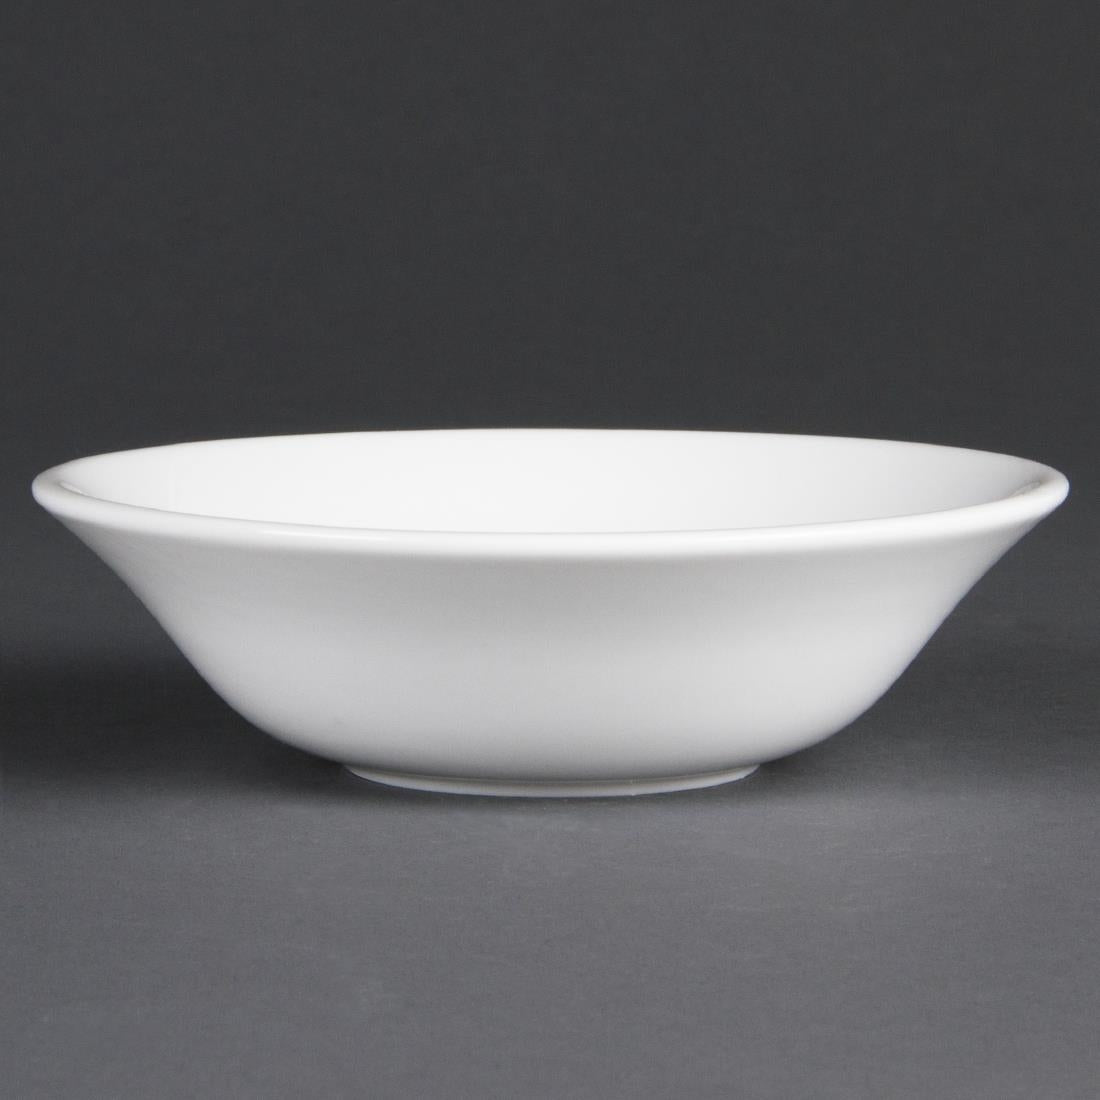 CB475 Olympia Whiteware Oatmeal Bowls 150mm 300ml (Pack of 12)